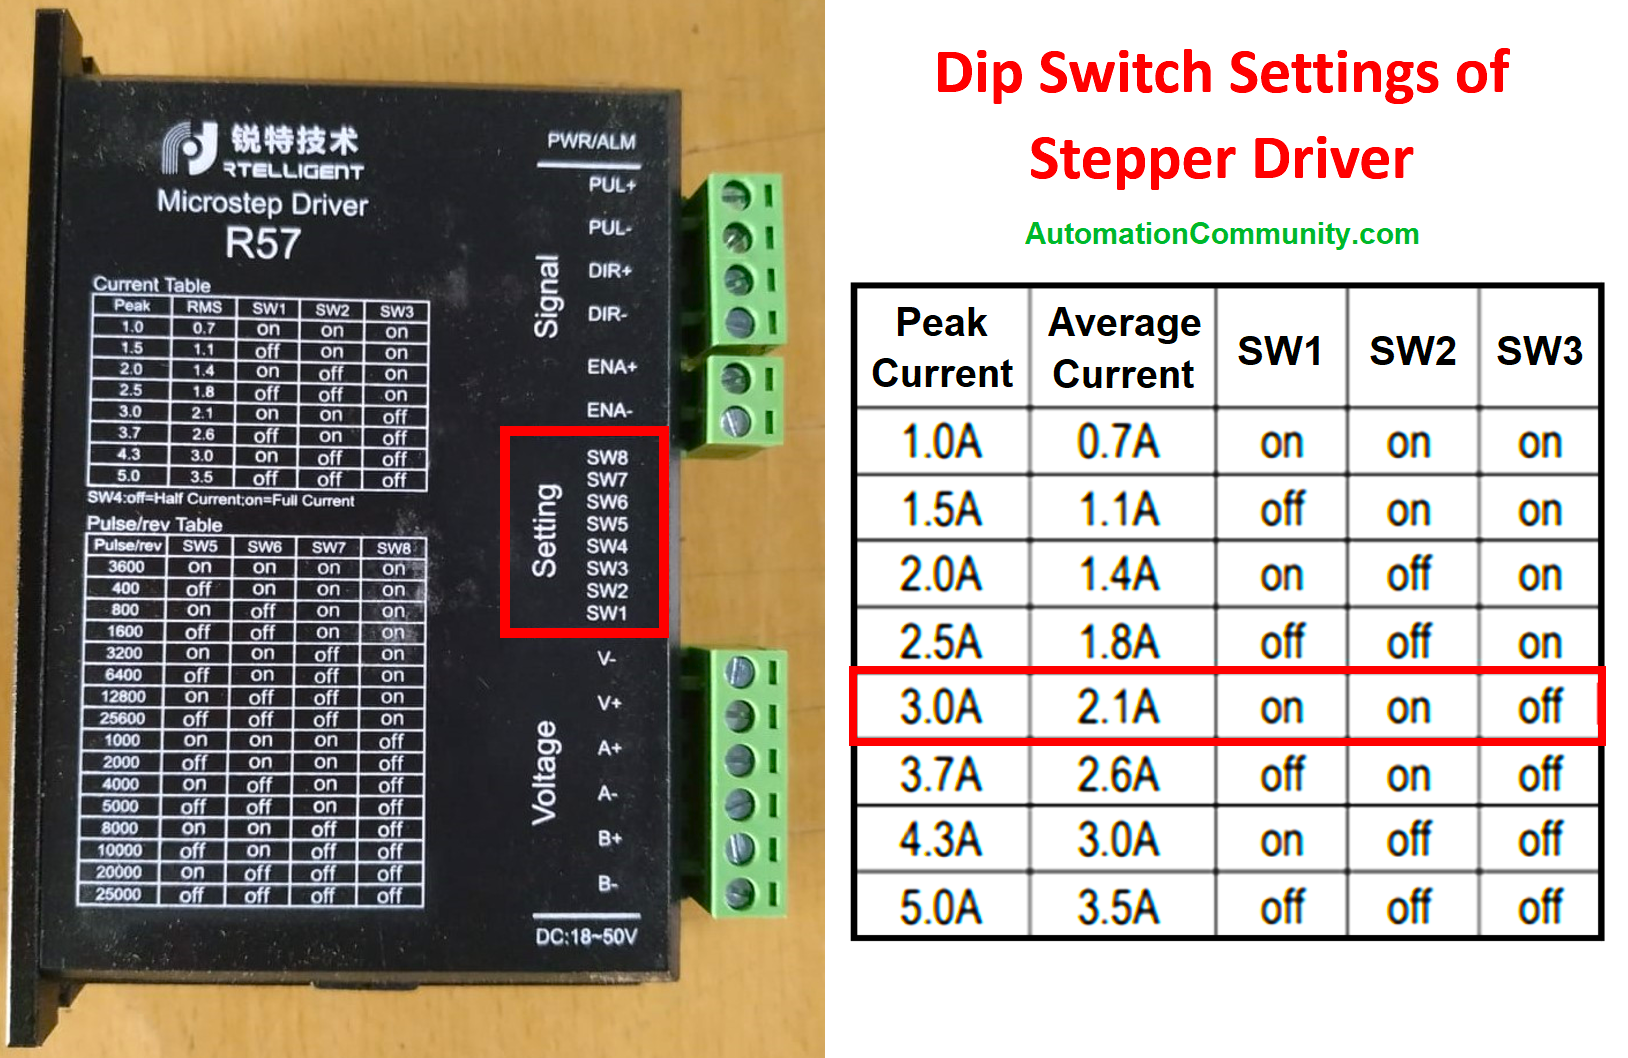 Dip Switch Settings of Stepper Driver